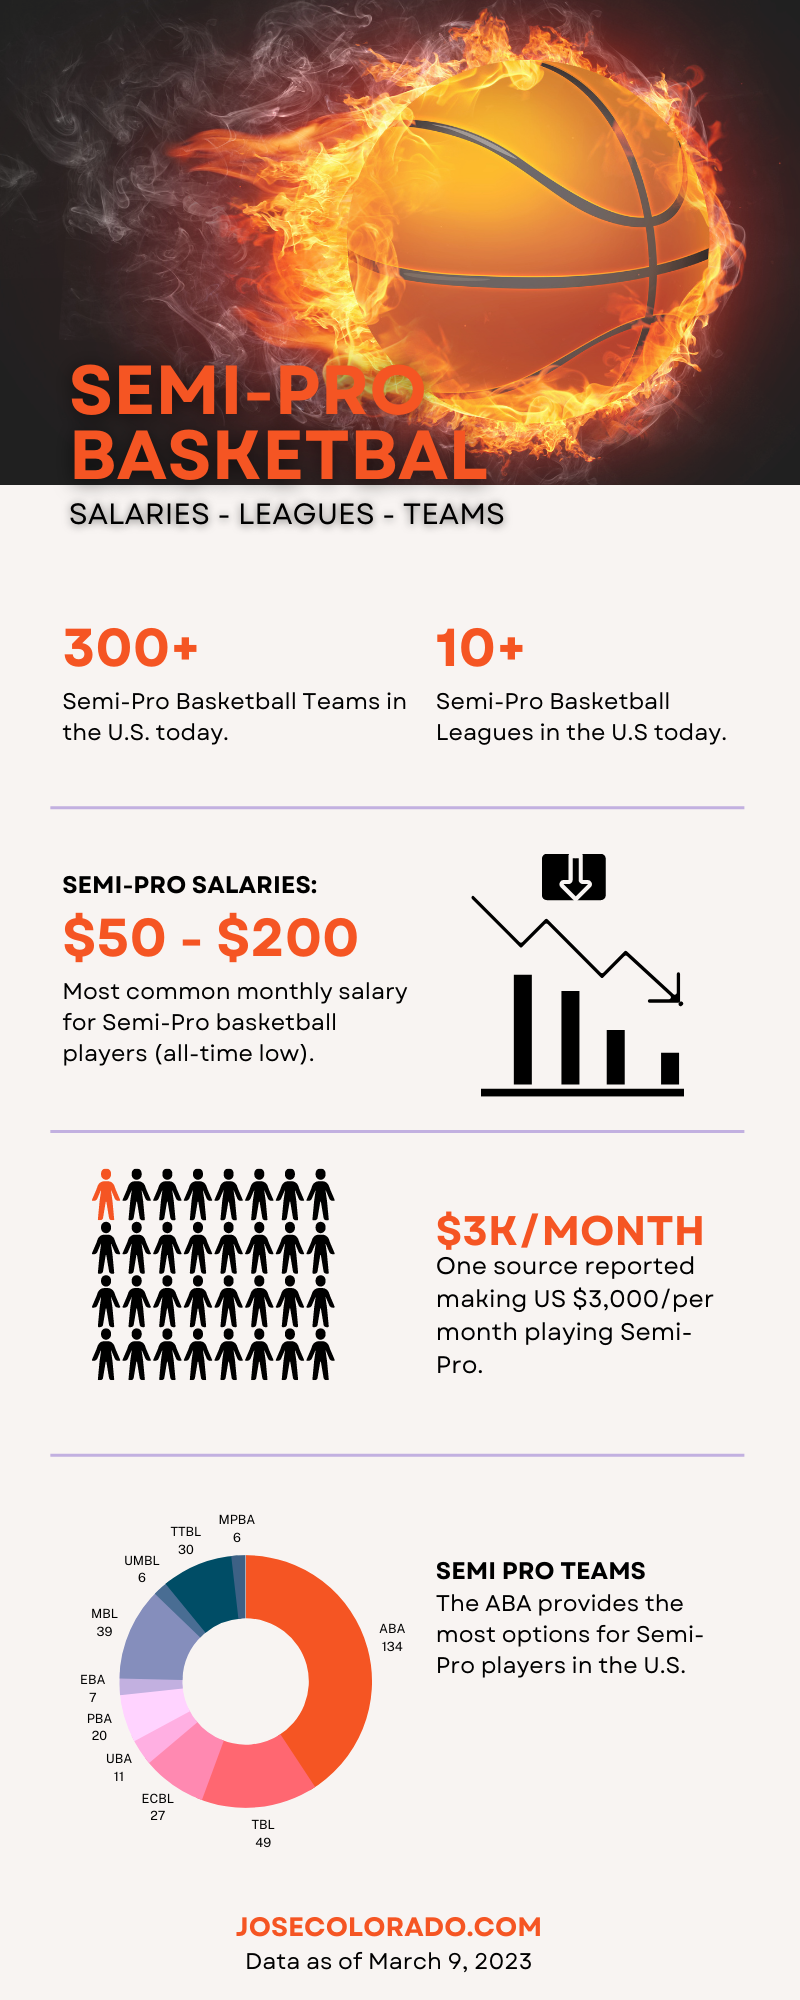 Semi Pro basketball league salaries will generally be $50 - $200/per month with the ABA basketball league providing the most Semi Pro team options.